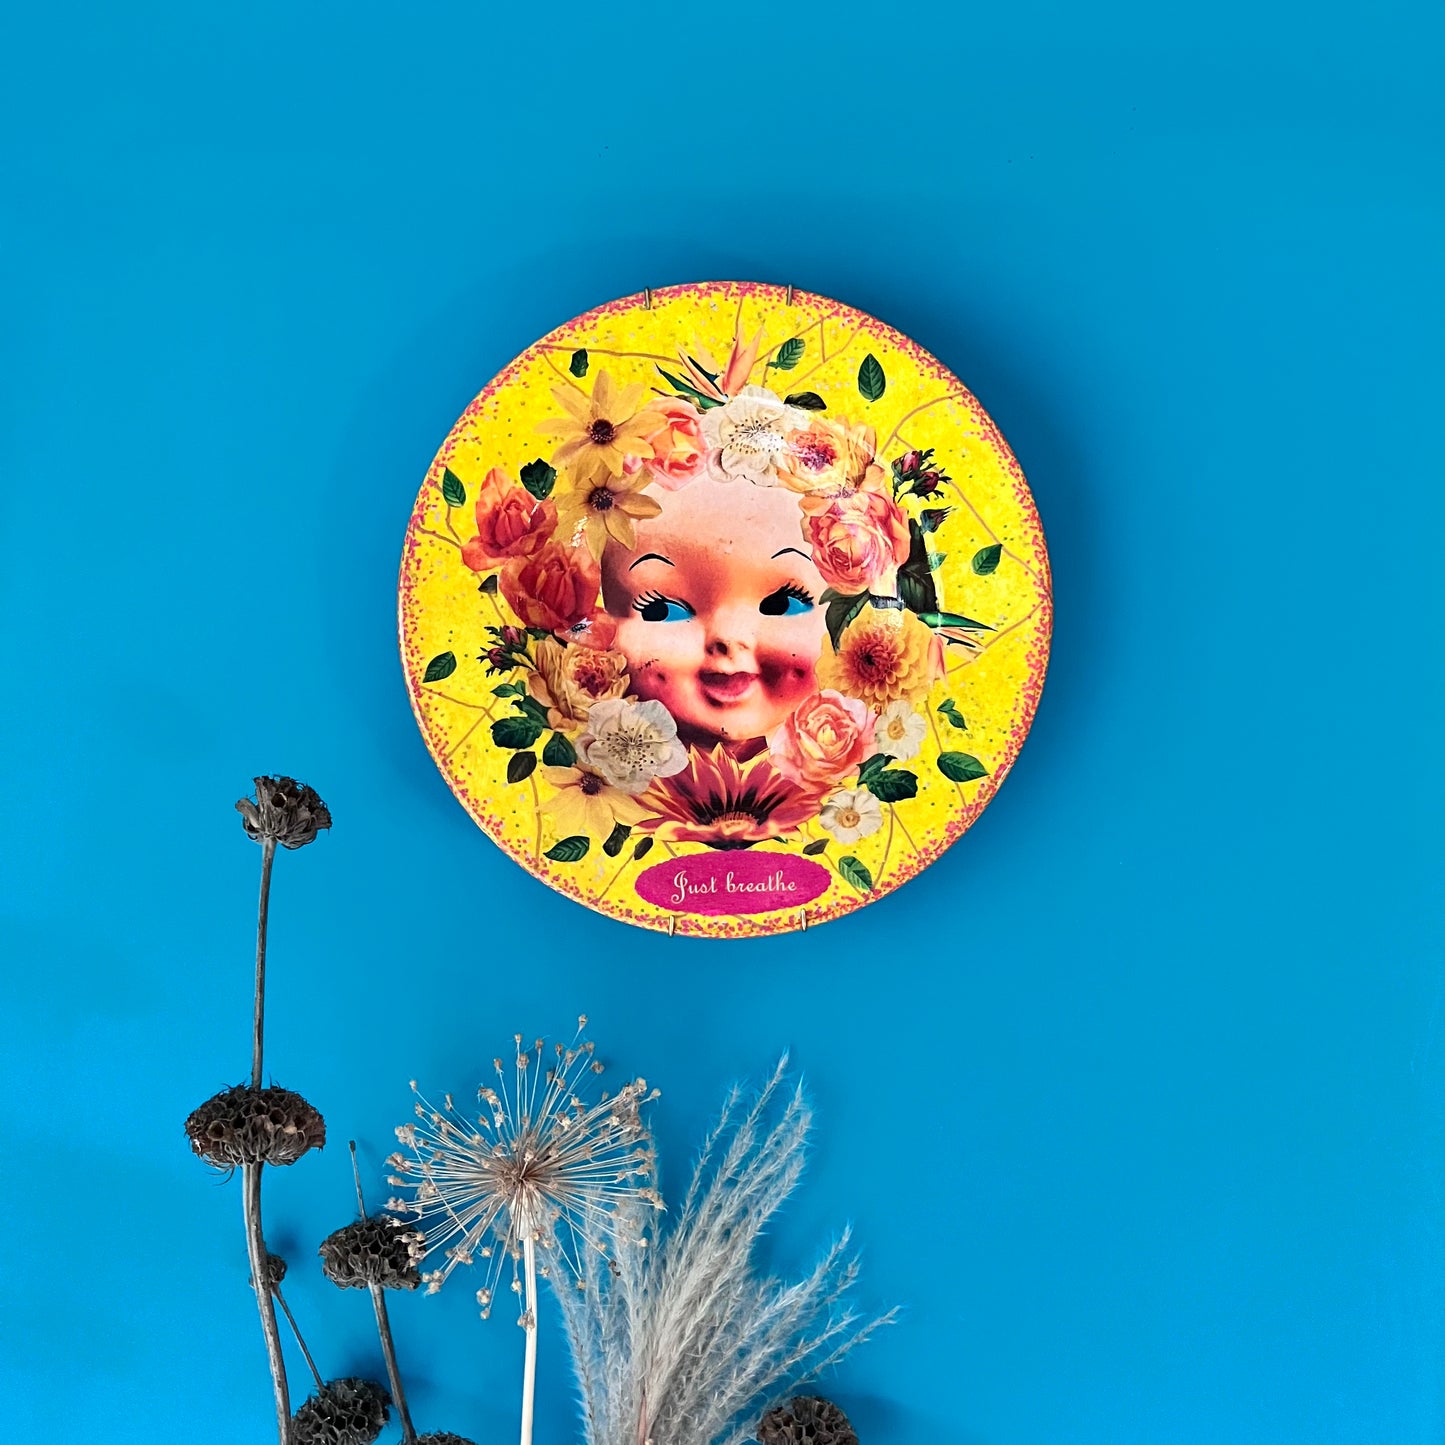 Yellow Upcycled Wall Plate “Just Breathe” - by House of Frisson